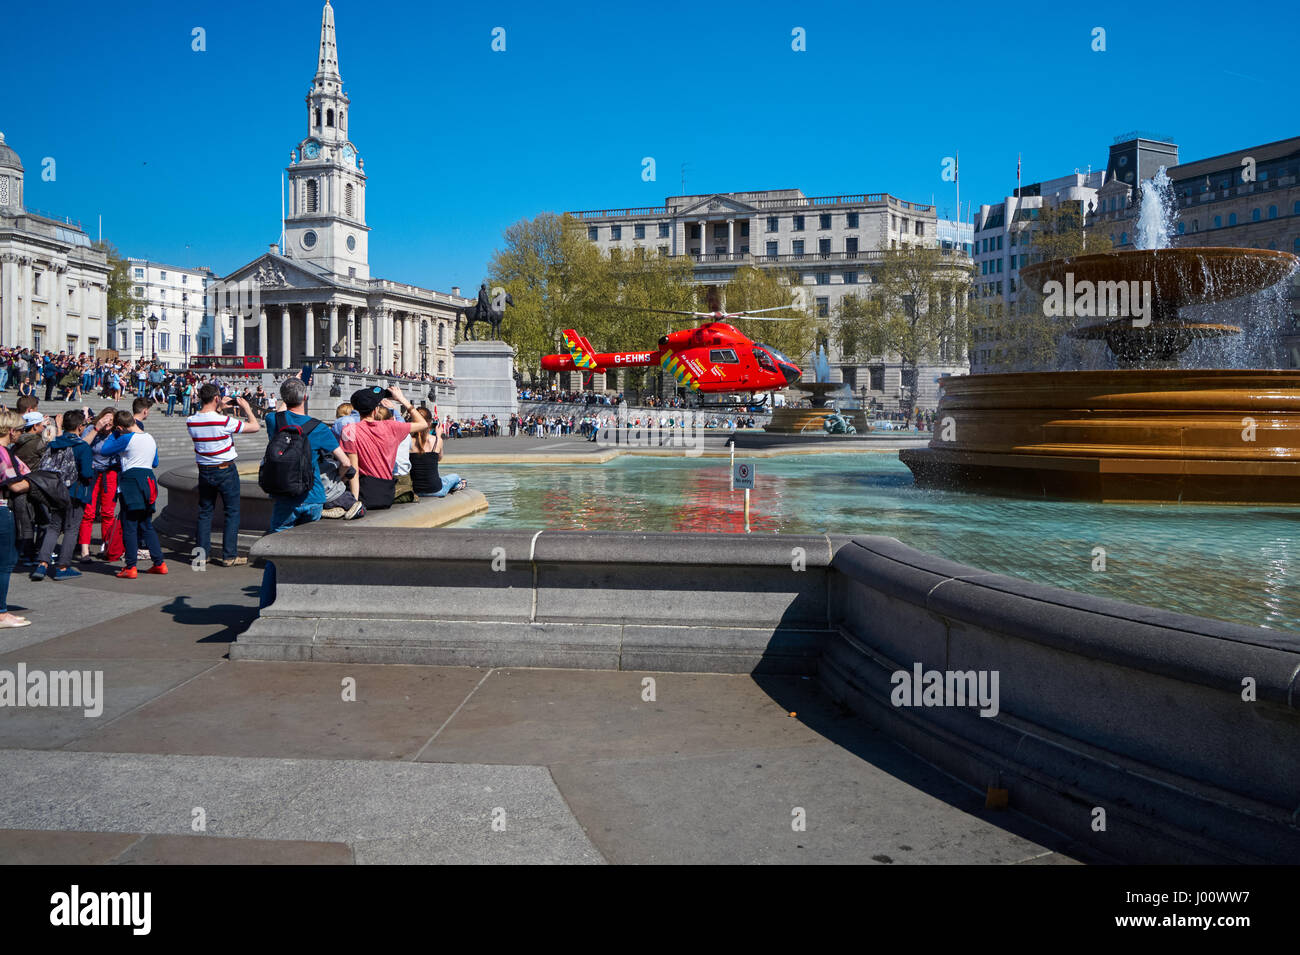 London's Air Ambulance lands at Trafalgar Square in response to a nearby accident, London England United Kingdom UK Stock Photo